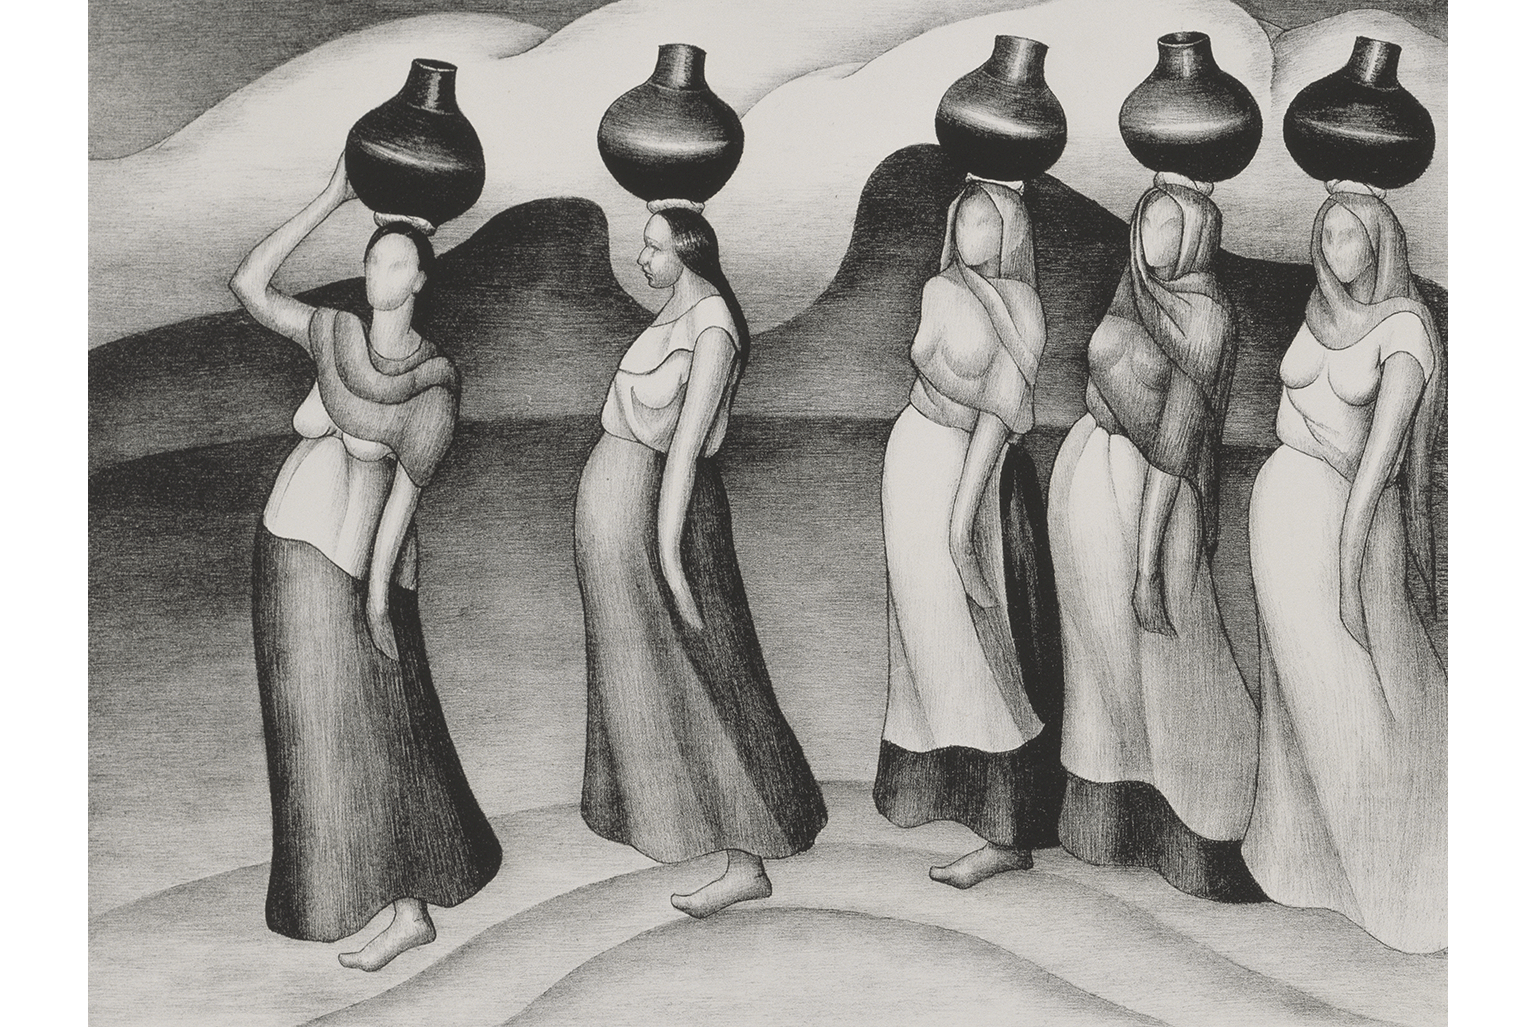 Henrietta Shore, Women of Oaxaca, 1927-1928, Lithograph, 19 x 24 in. The Buck Collection at UCI Jack and Shanaz Langson Institute and Museum of California Art.